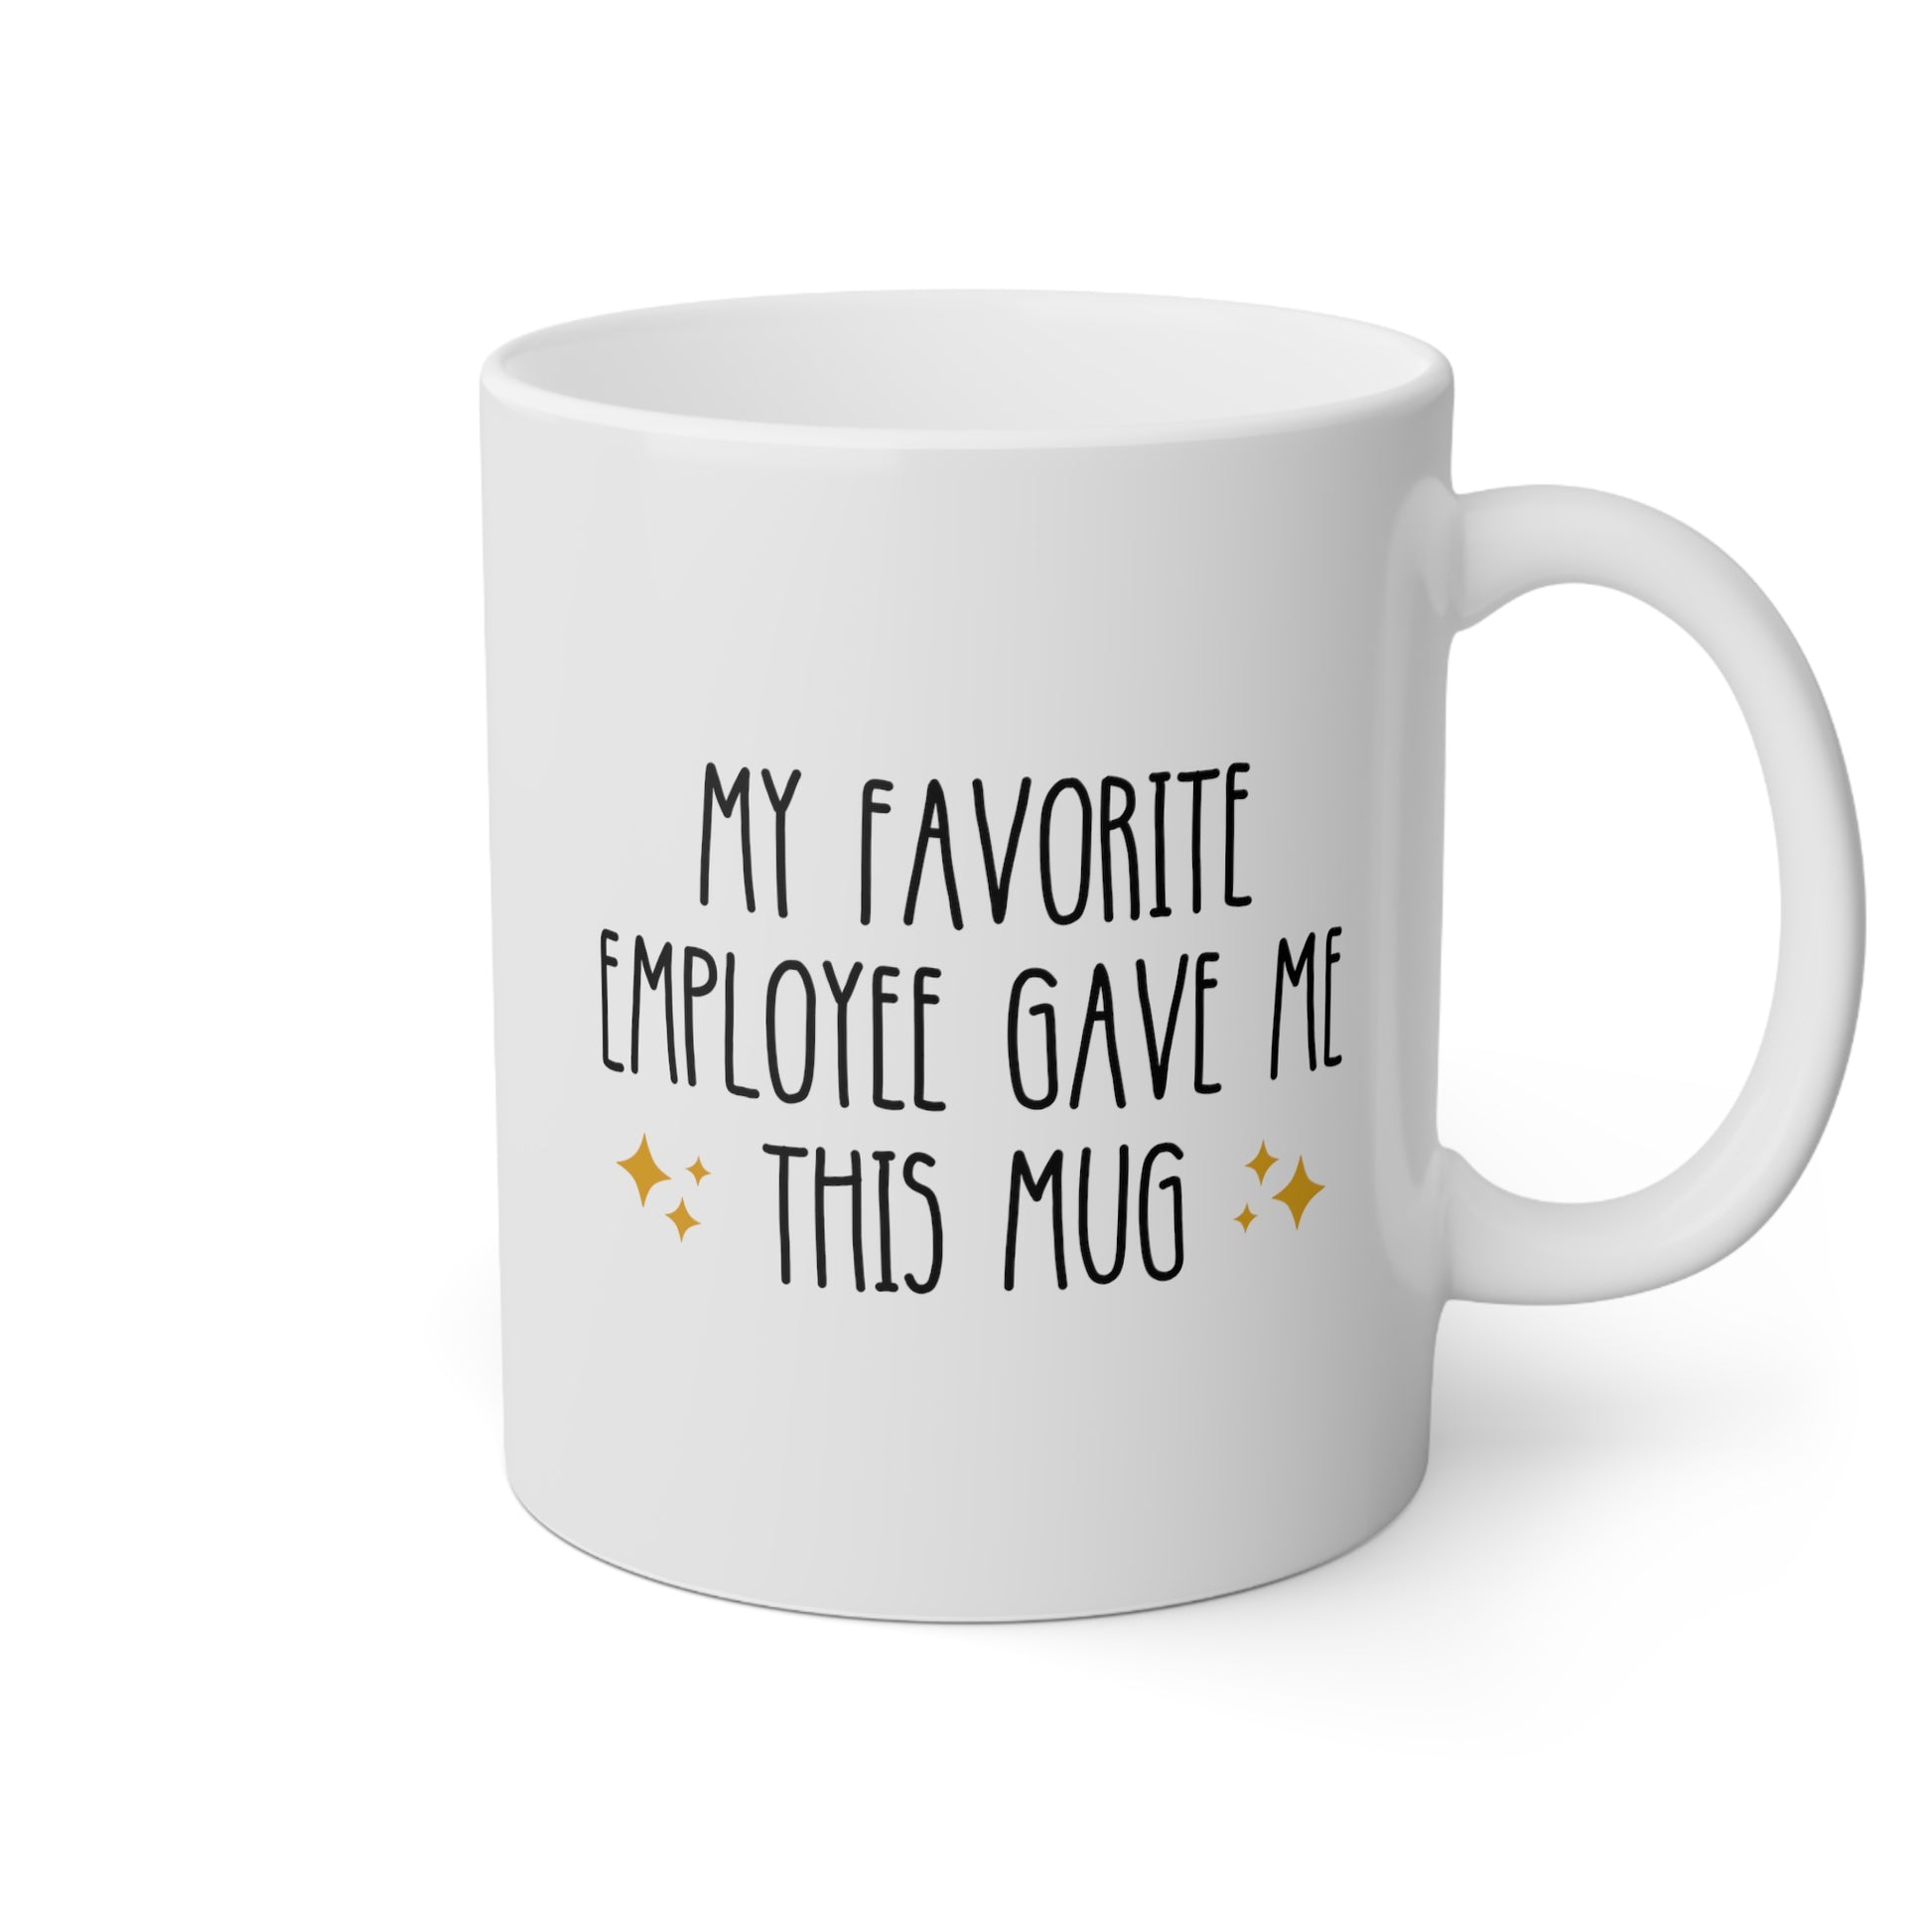 My Favorite Employee Gave Me This Mug 11oz white funny large coffee mug gift for boss work office cup manager team leader best ever waveywares wavey wares wavywares wavy wares